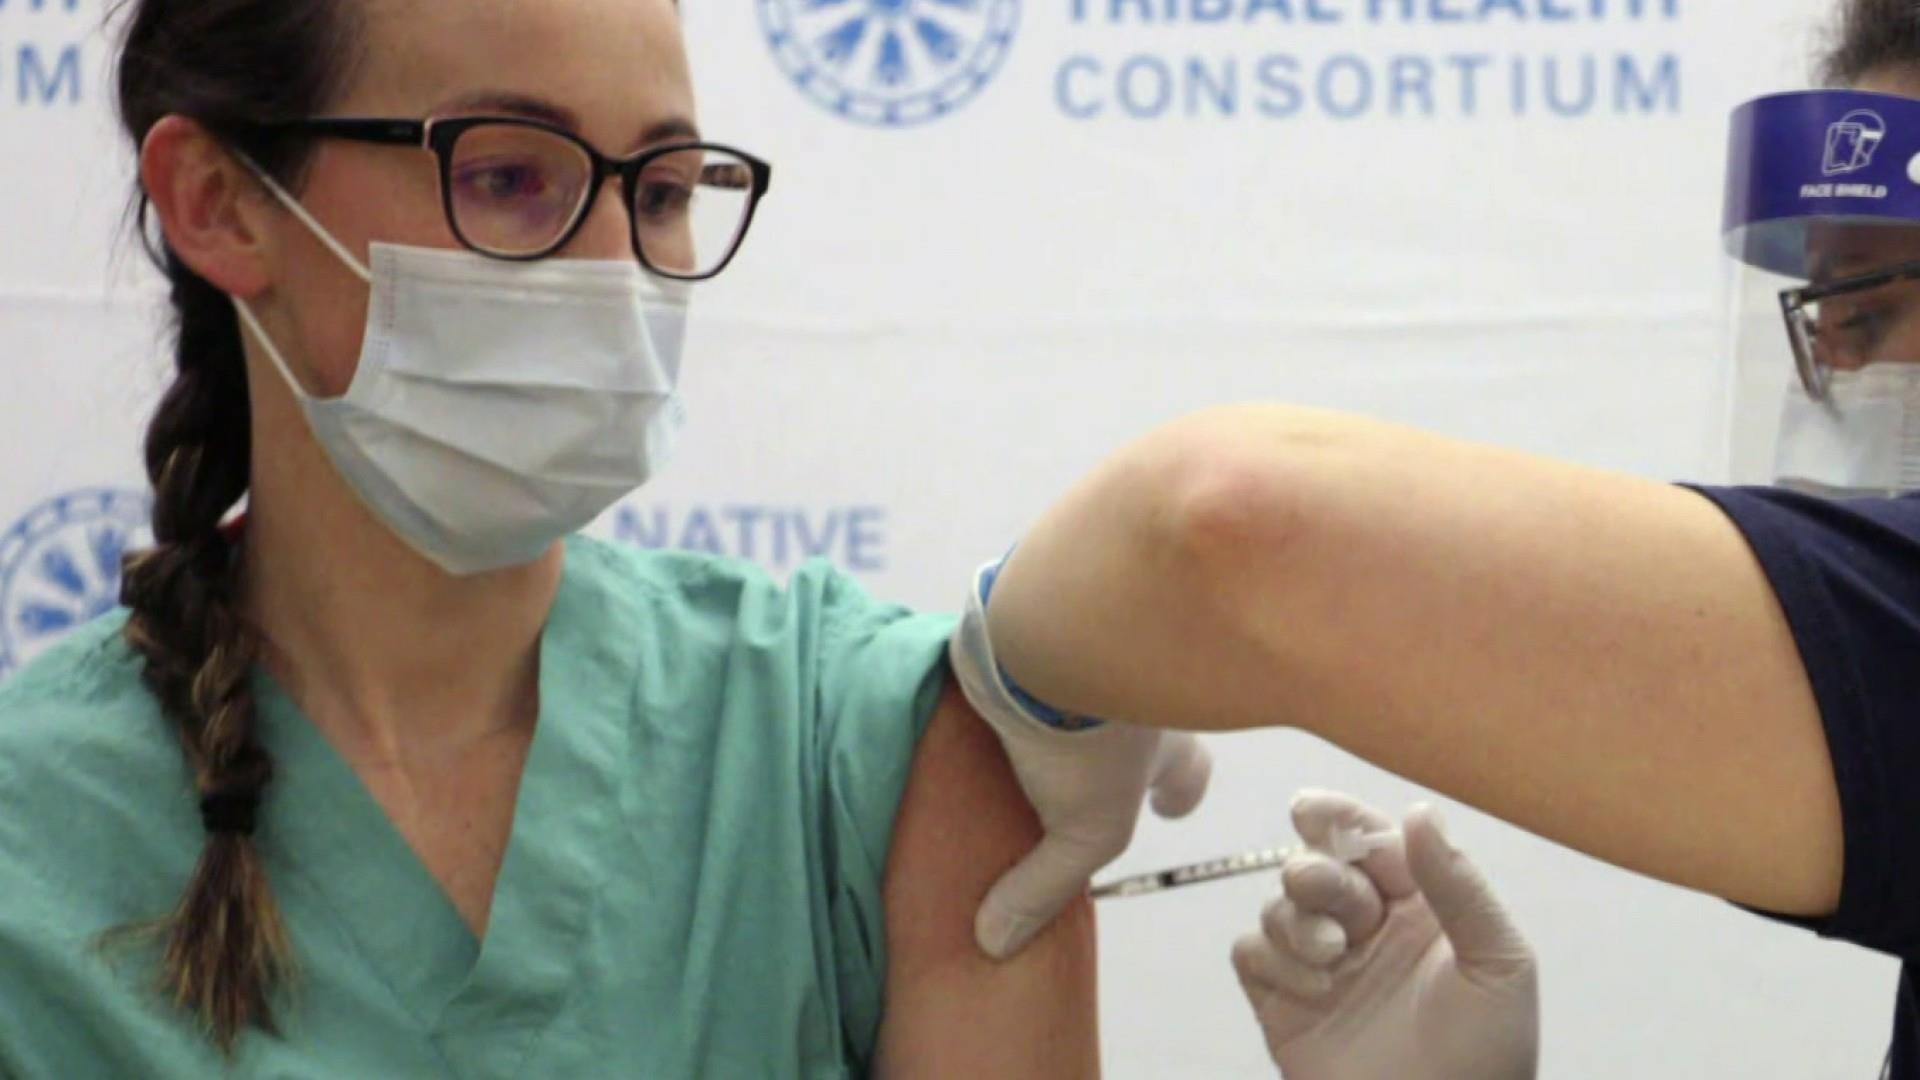 Scientific doctors weigh in as states face vaccine roll out considerations